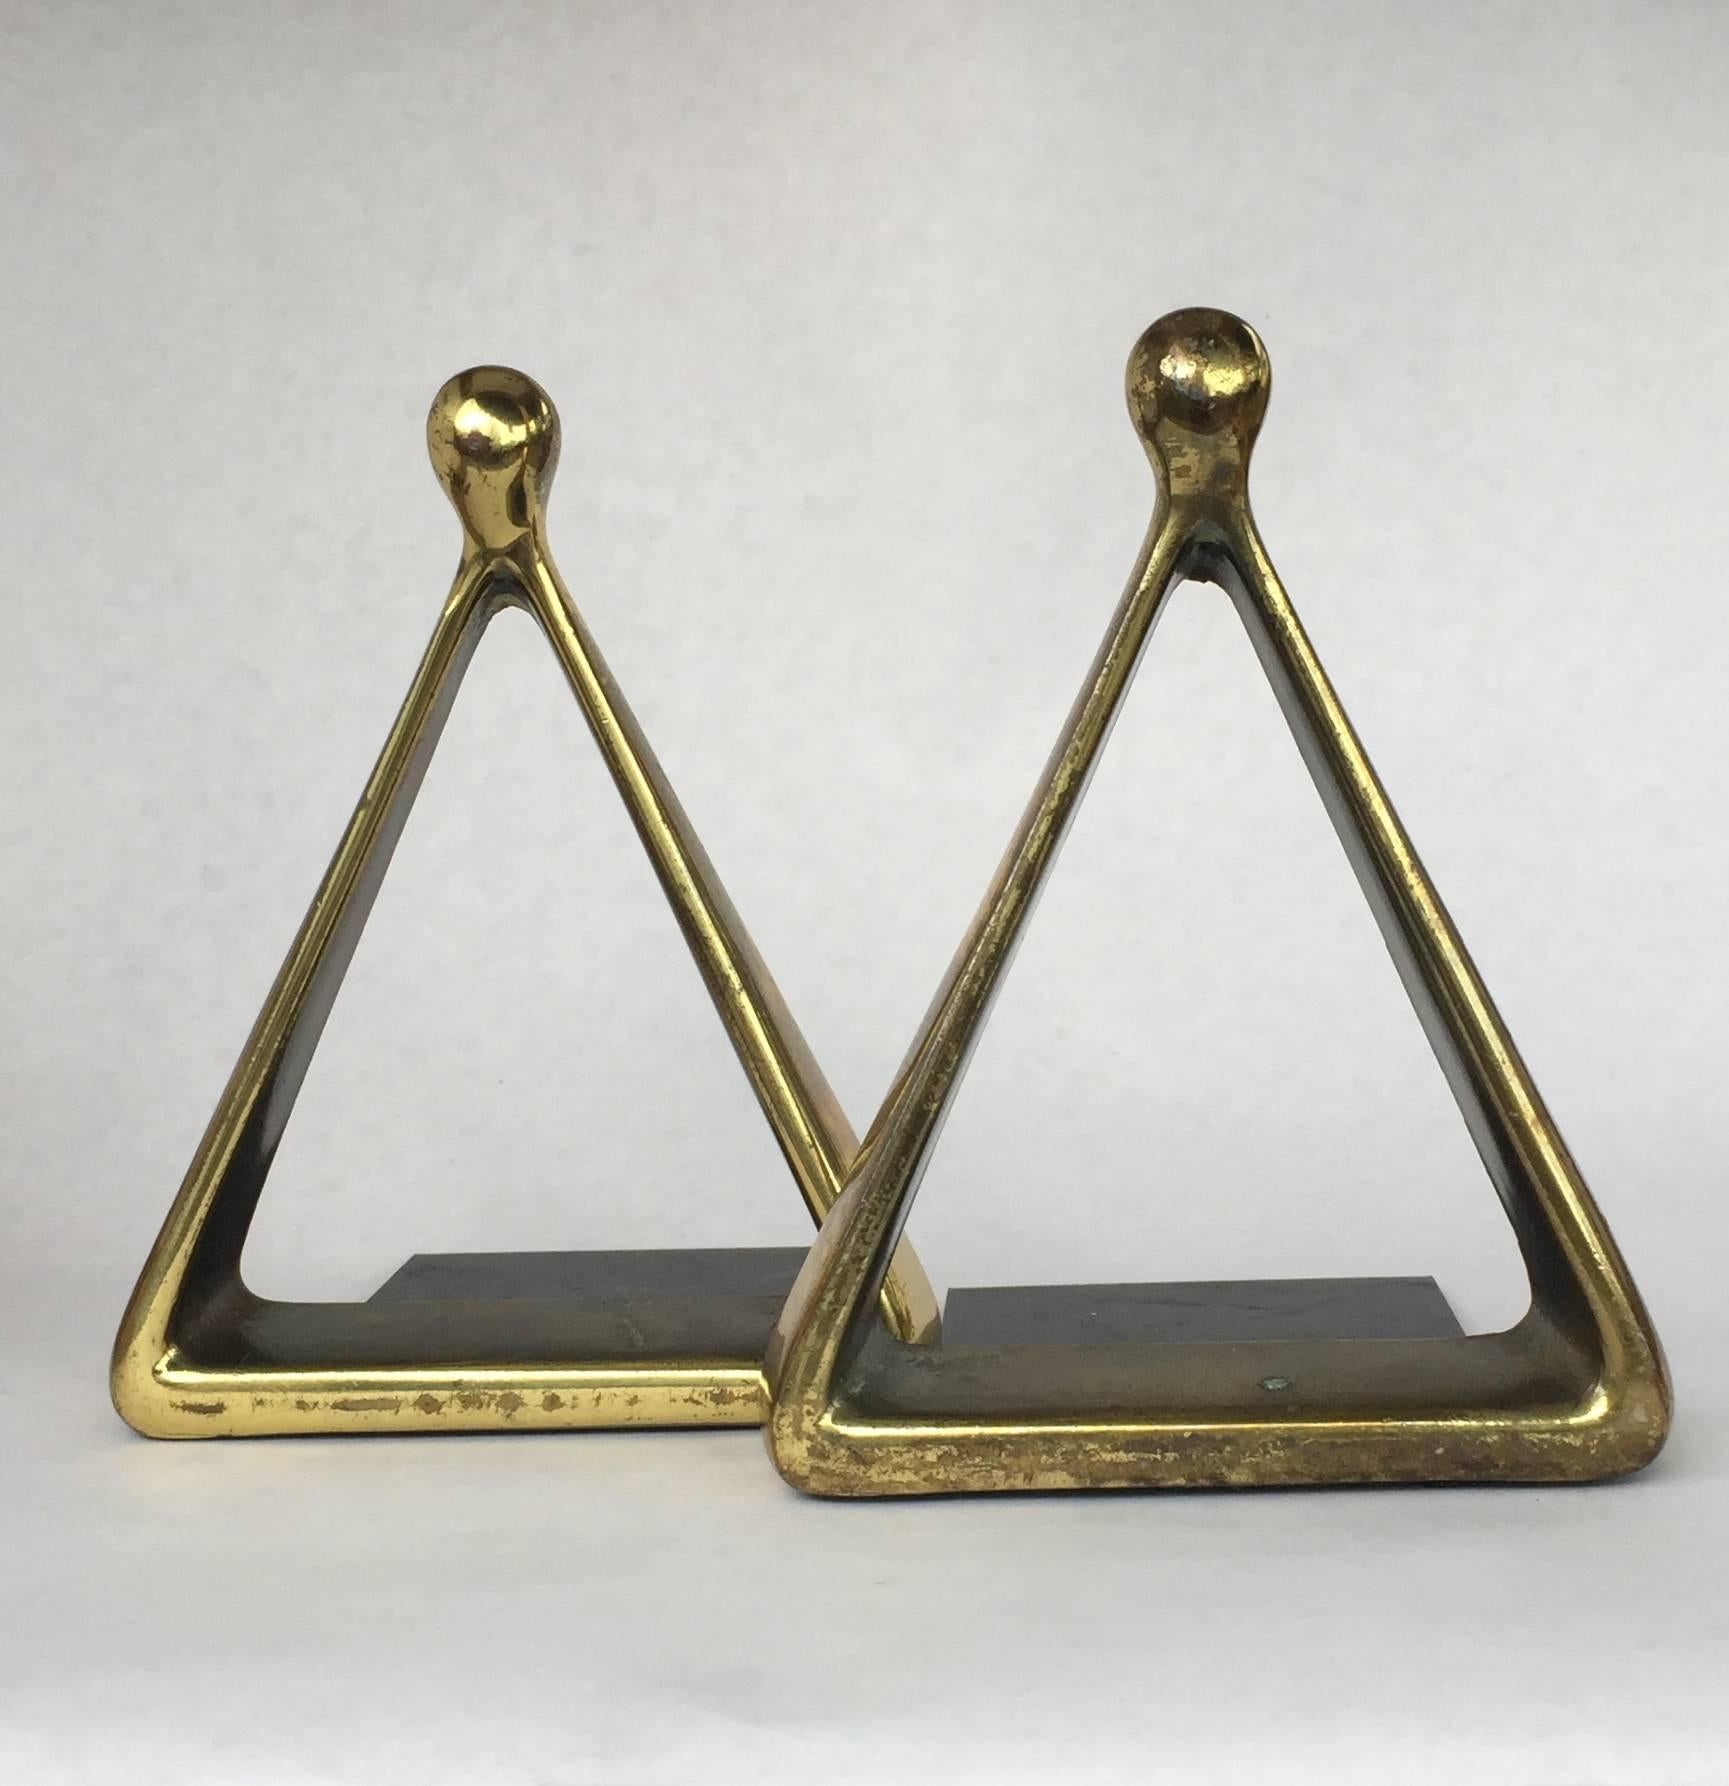 Sculptural and beautiful brass-plated bookends designed by Ben Seibel for Raymor. Signed Jenfredware.